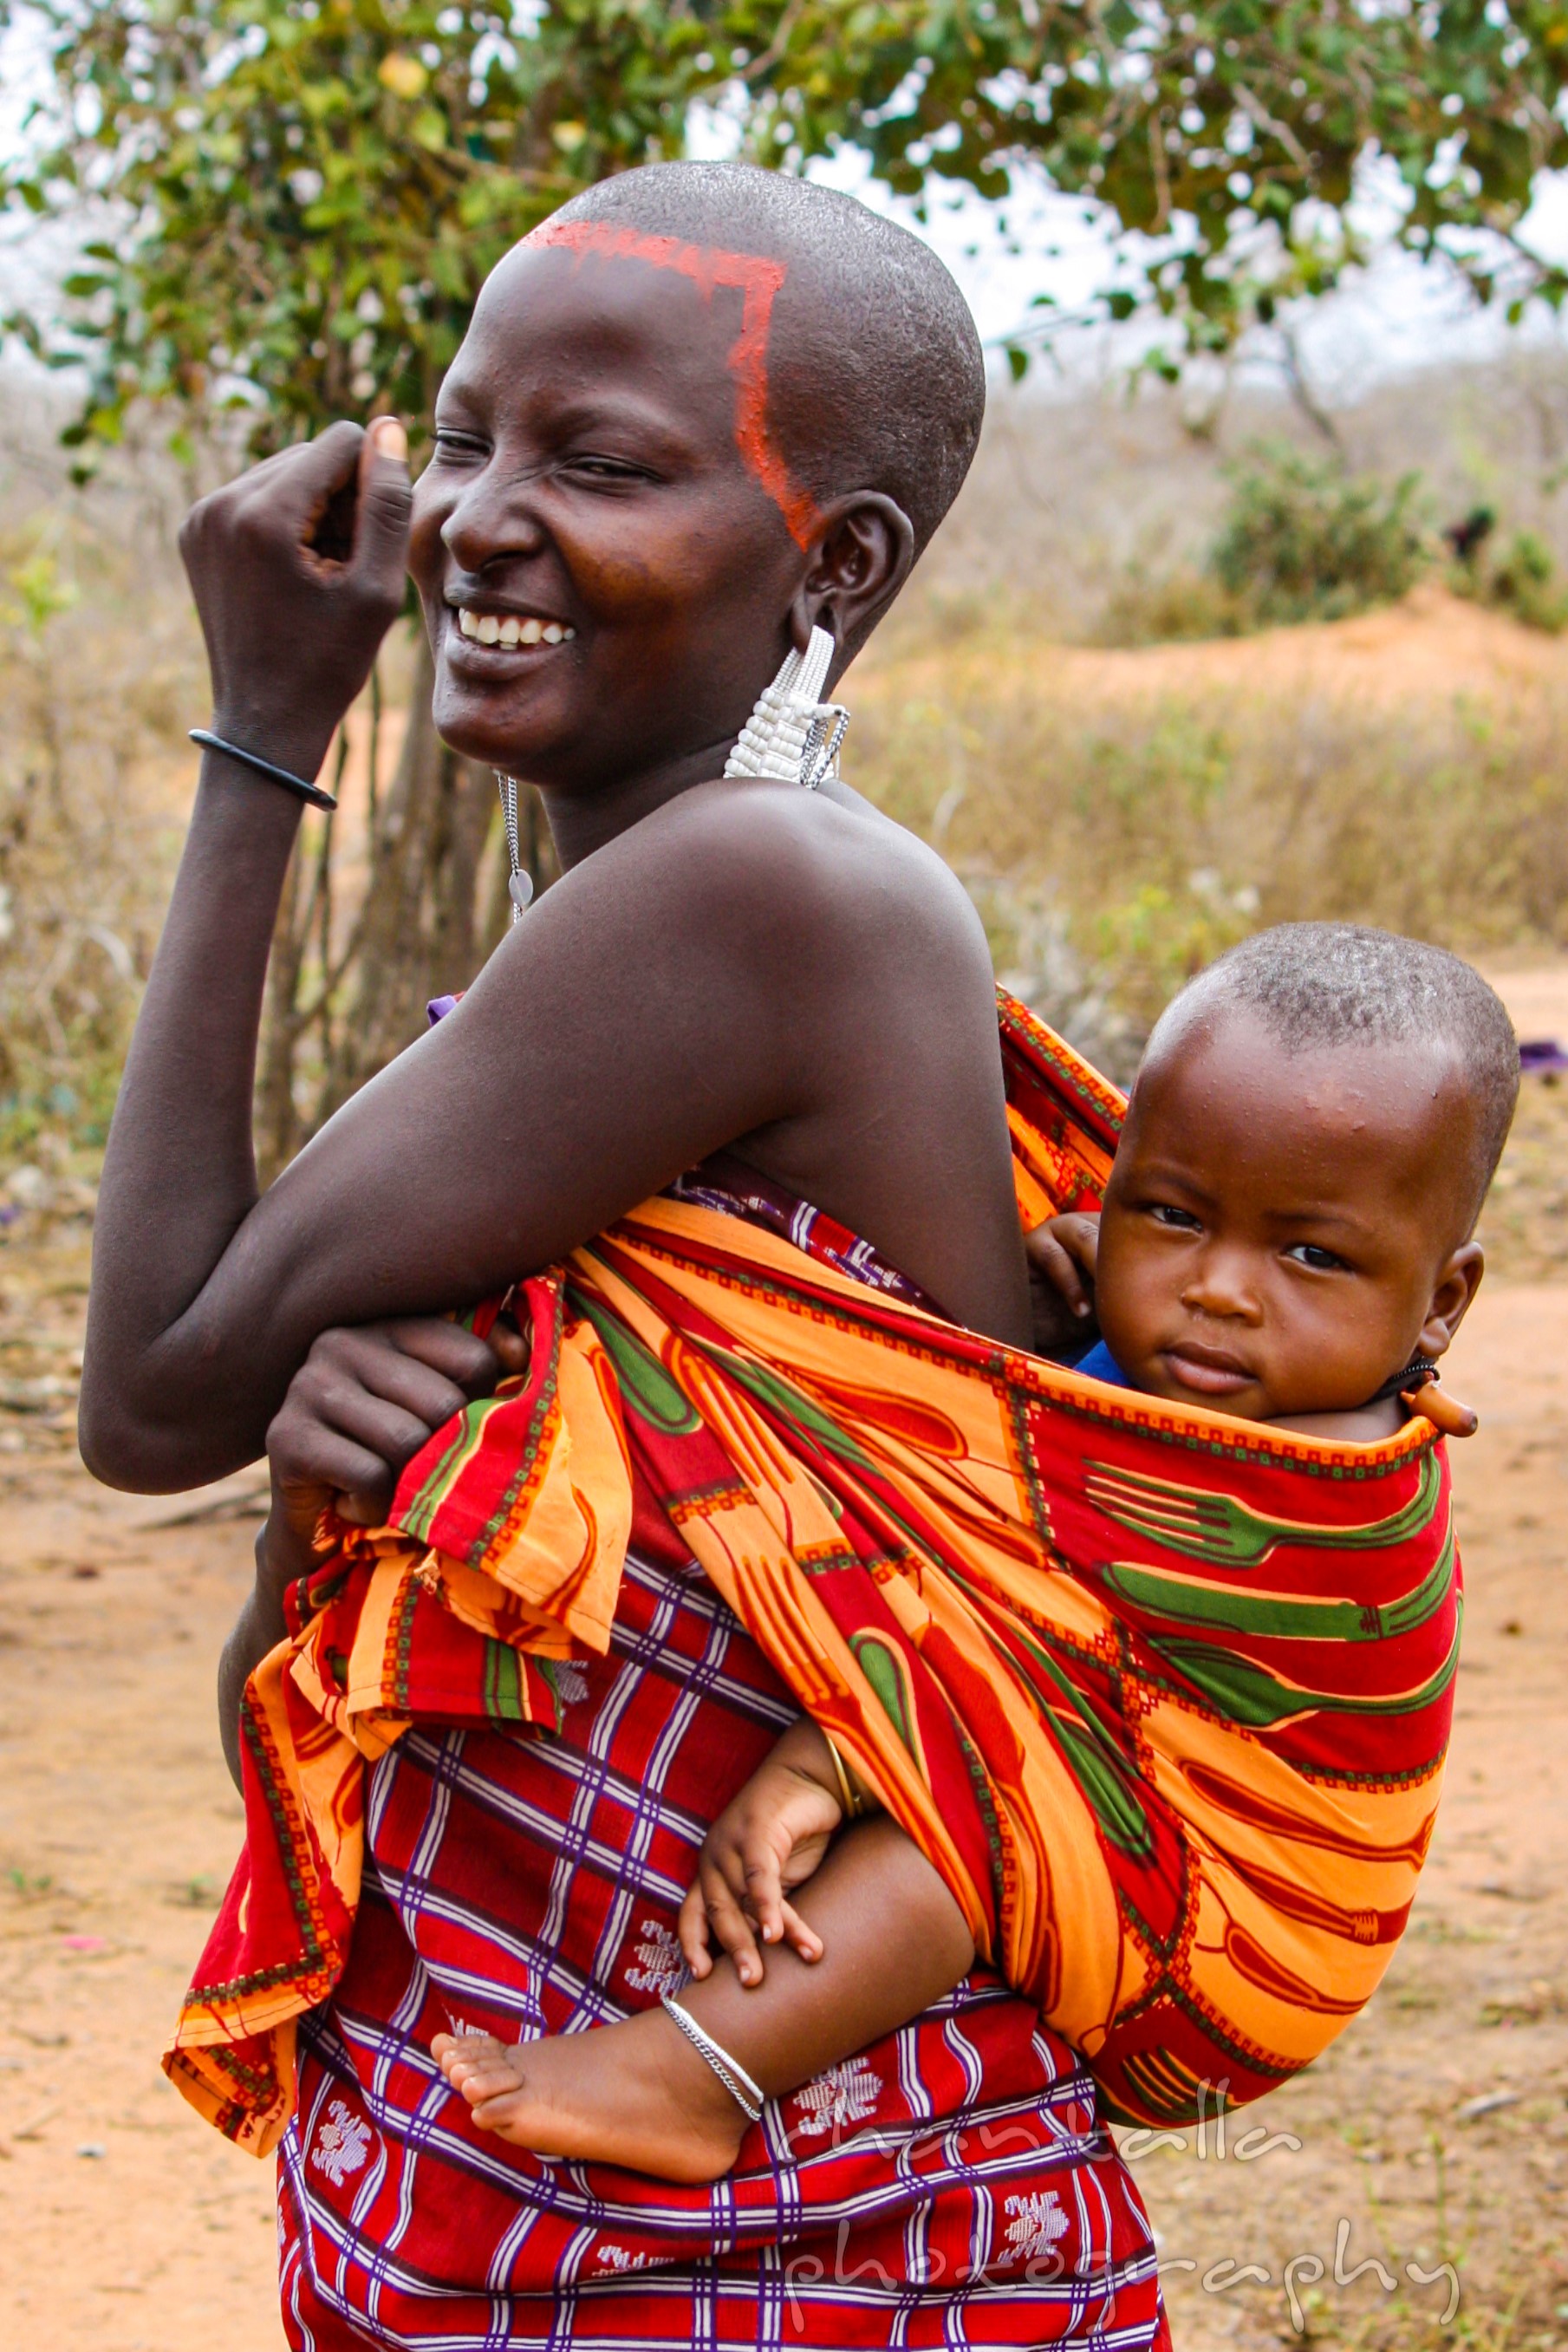 This traditional Masai woman lives in Kenya, and posed for the camera with her beautiful baby.